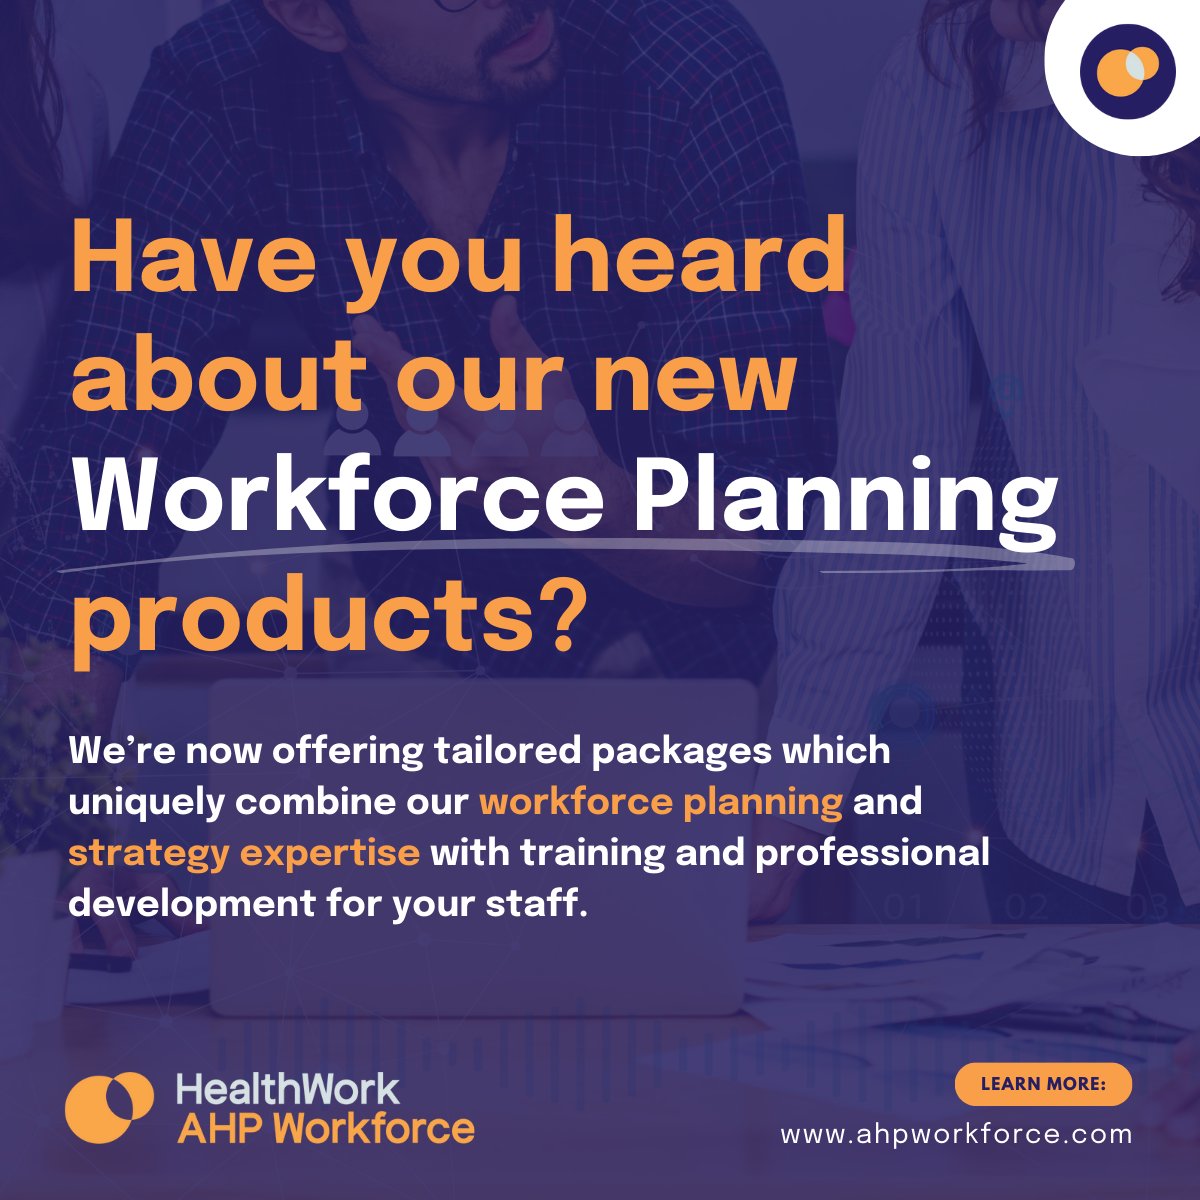 📢 Have you heard about our new workforce planning products? They're ideal for regional public health providers like hospital and health services, LHNs and LHDs. For more information contact Lauren Schneider: lauren@hwitl.com #AlliedHealth #WorkforcePlanning #AHPWorkforce